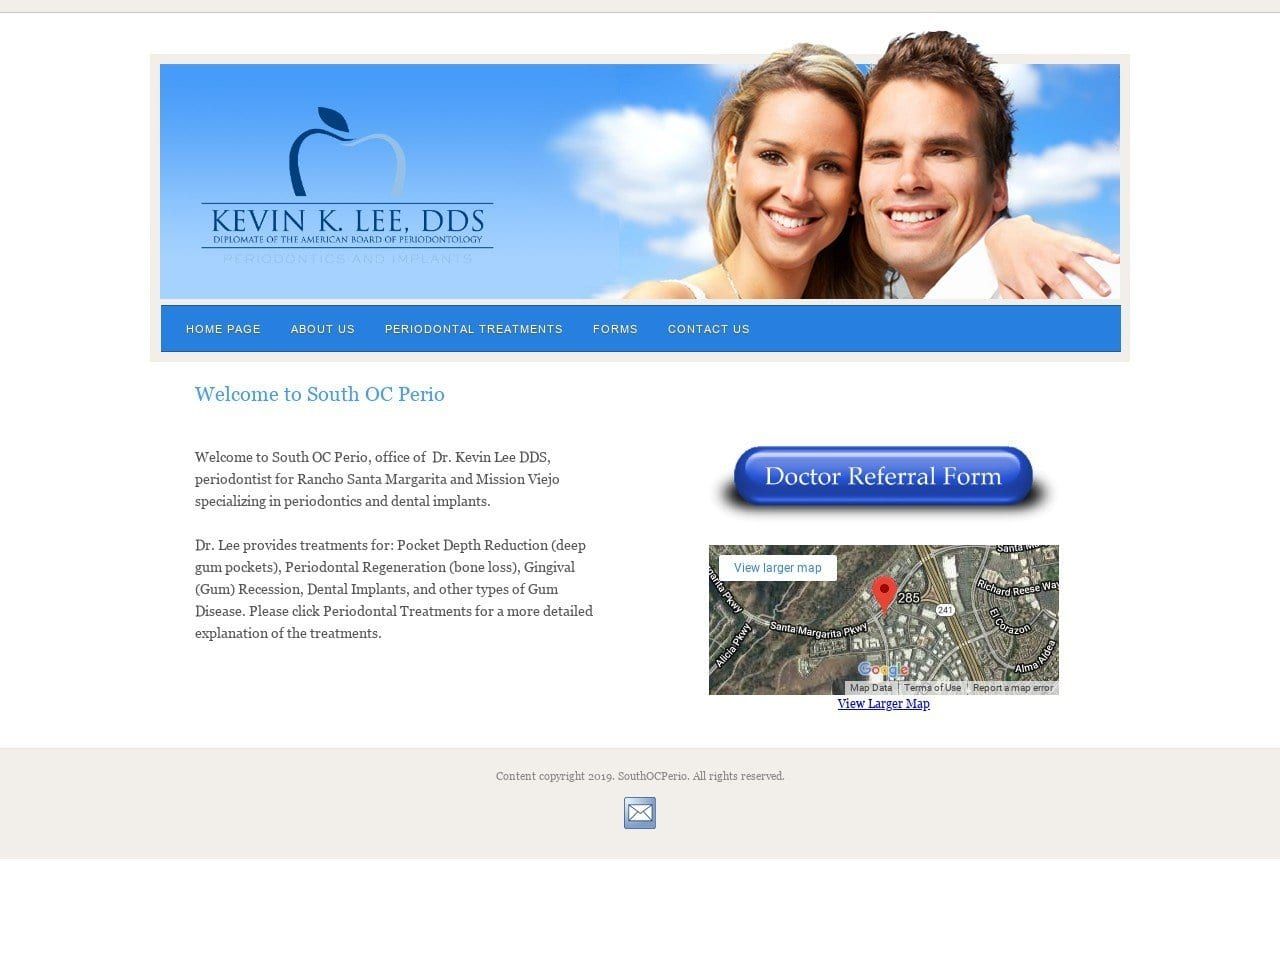 Kevin K. Lee DDS Board Certified Periodontist Website Screenshot from southocperio.com